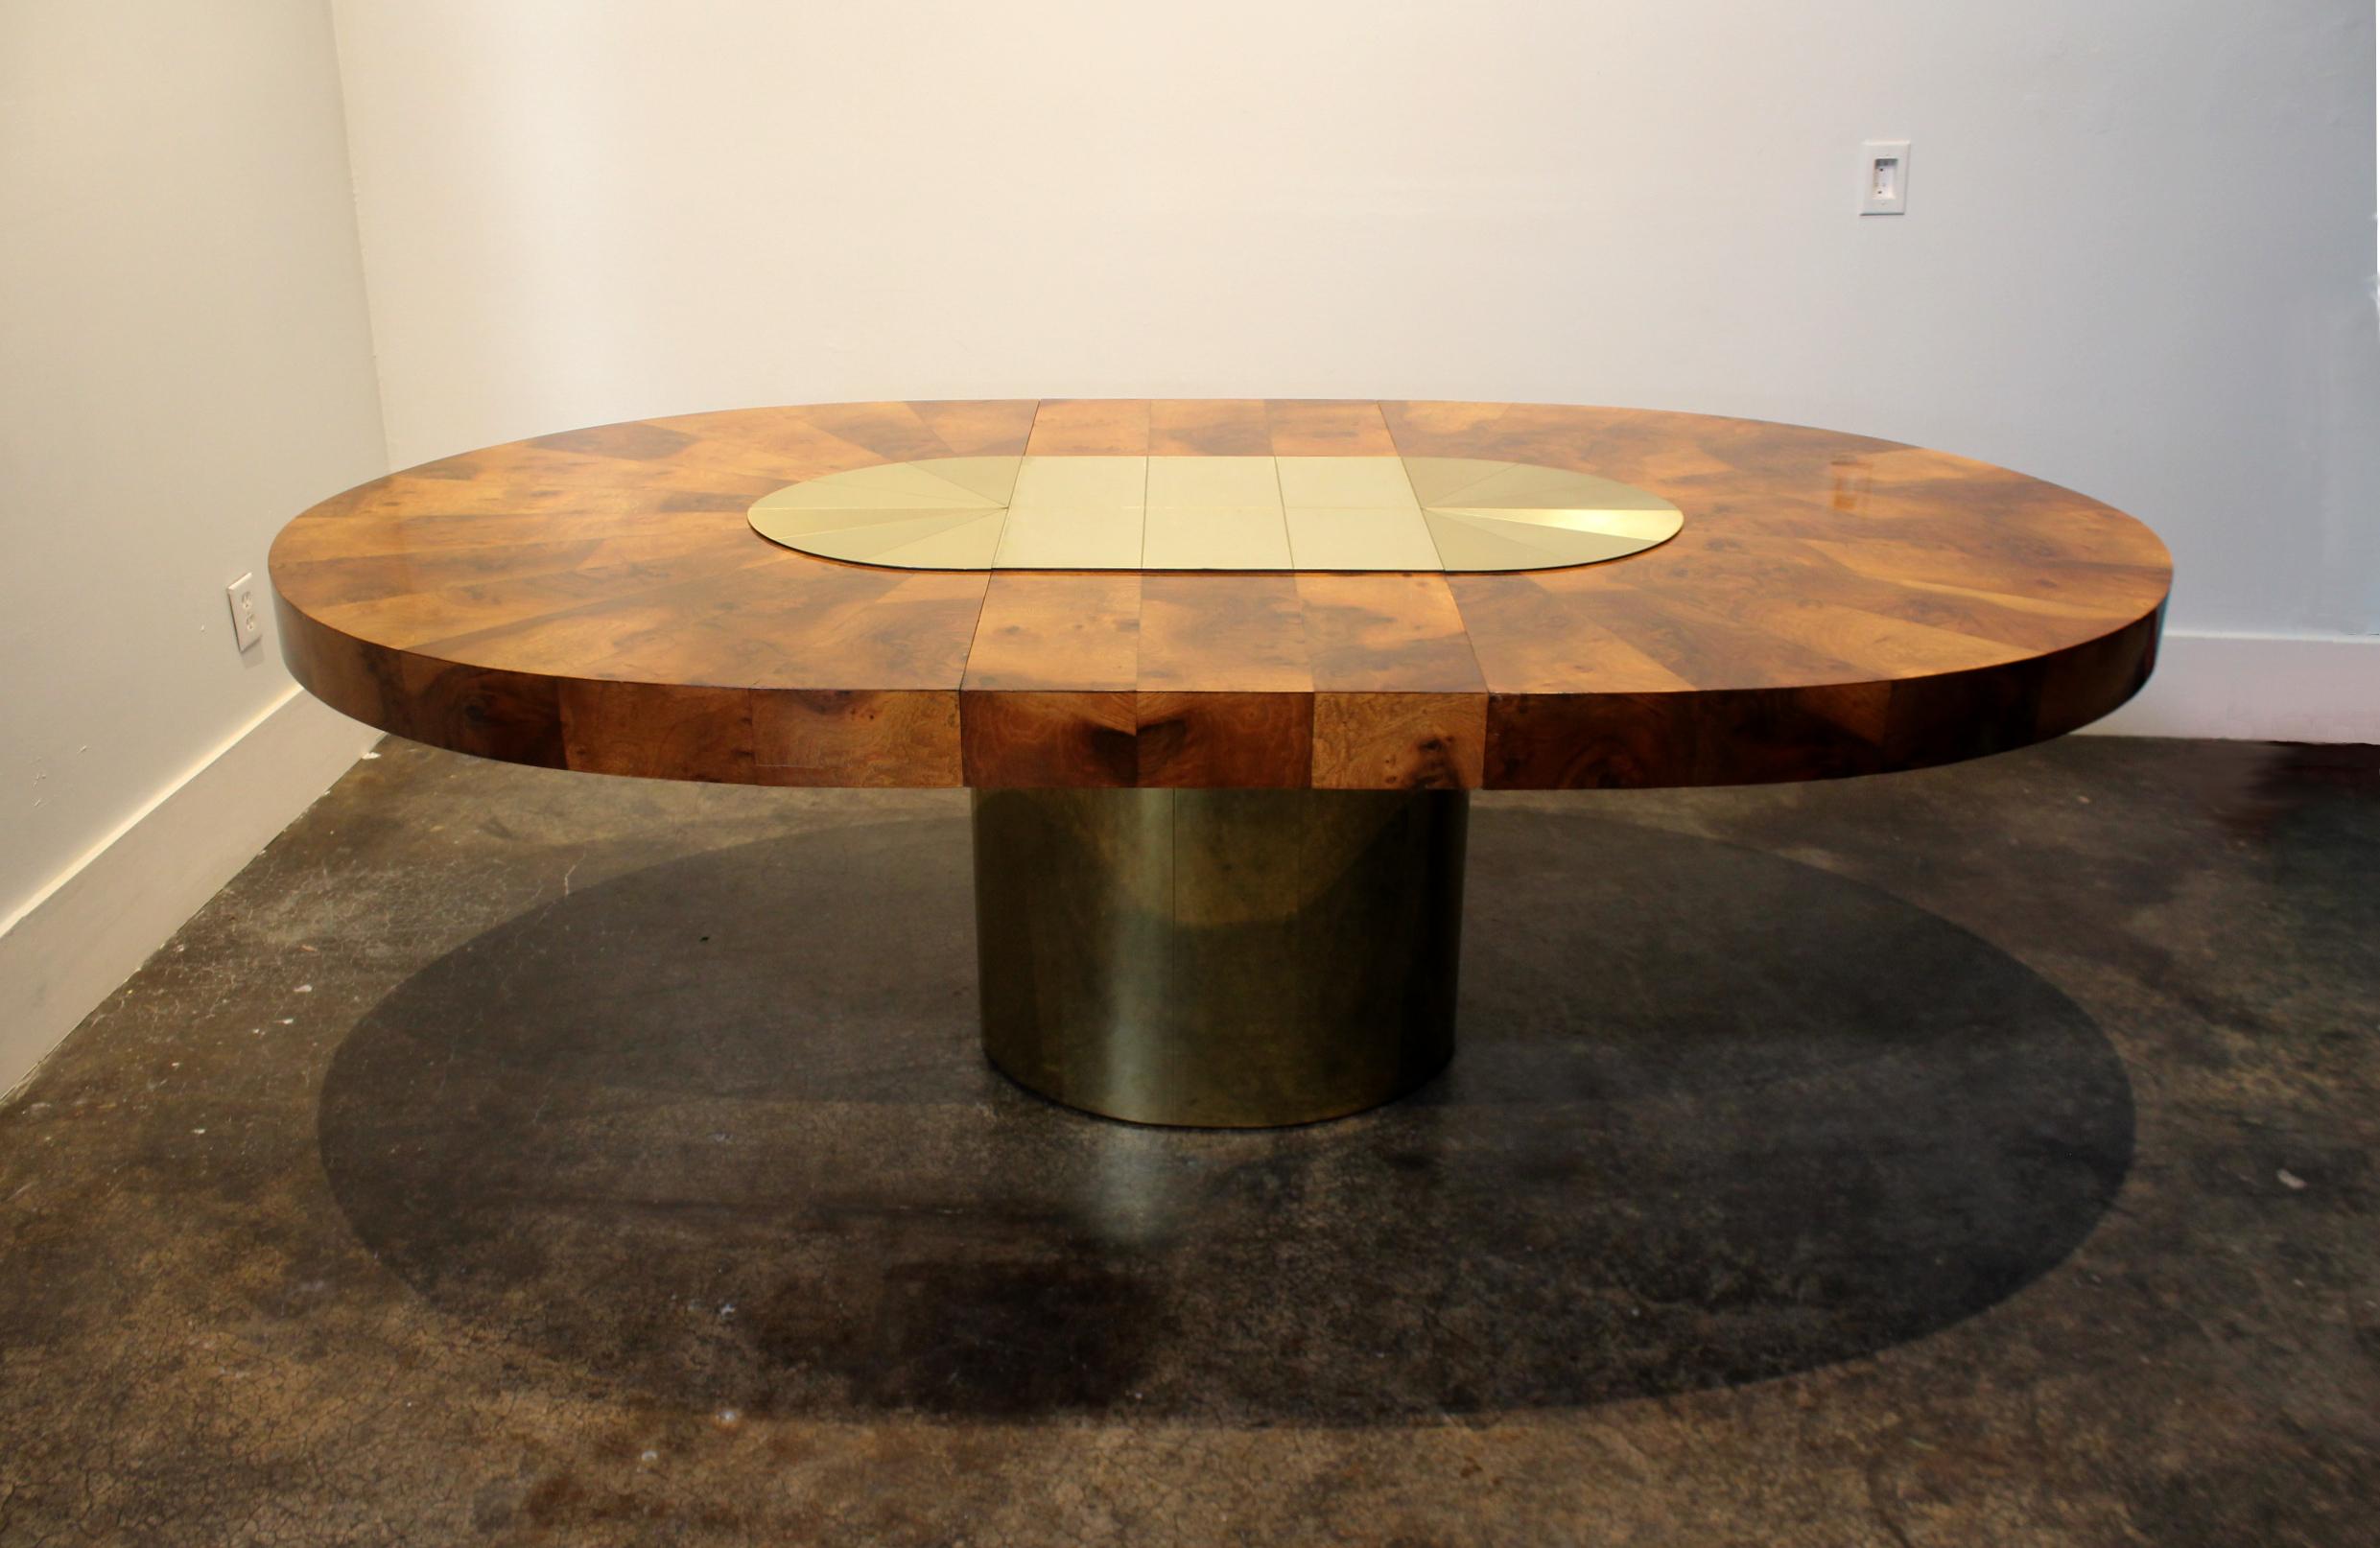 Stunning dining table by Paul Evan with beautiful sunburst brass and wood design. The wood and brass positively glow, circa 1970s. Table is in good condition with light wear (see pictures of worst spots).

Measurements:
92 1/2